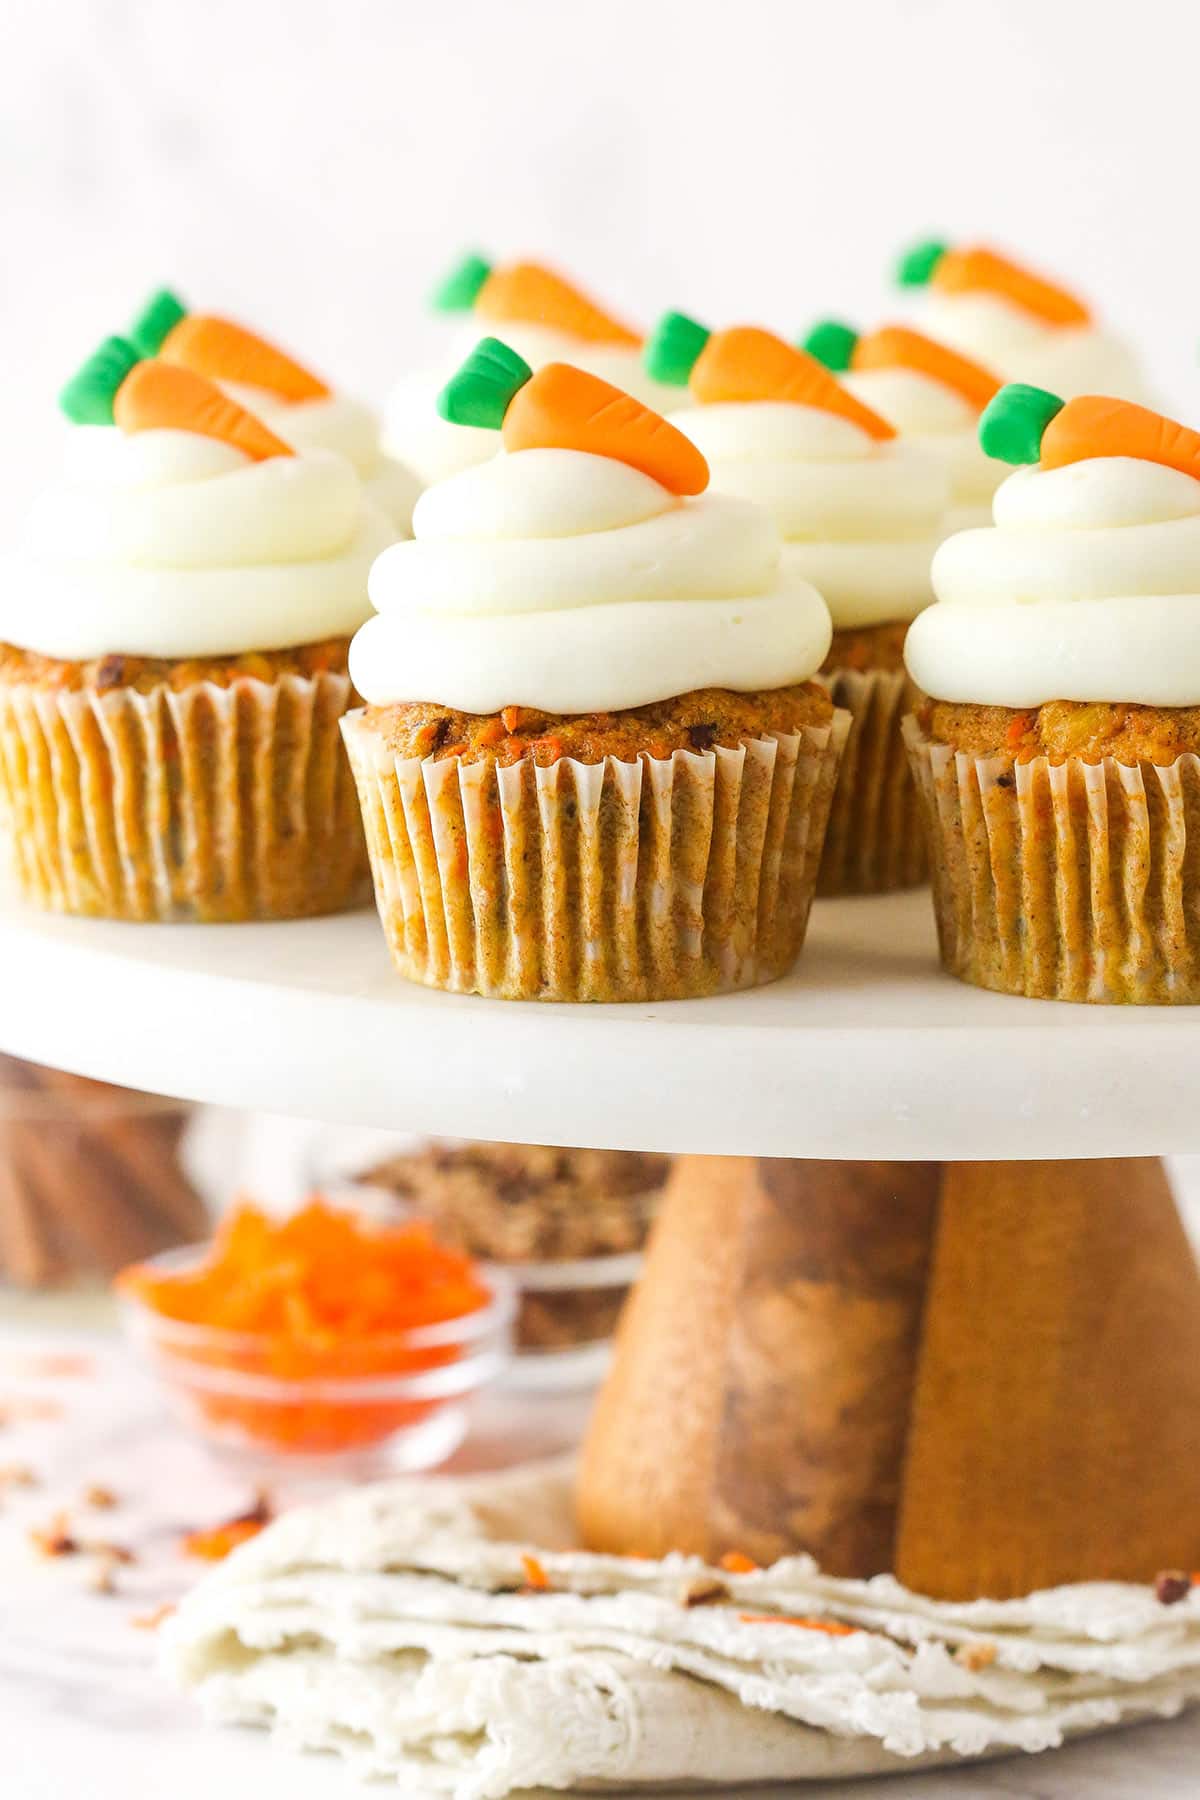 Carrot cake cupcakes on a cake stand.